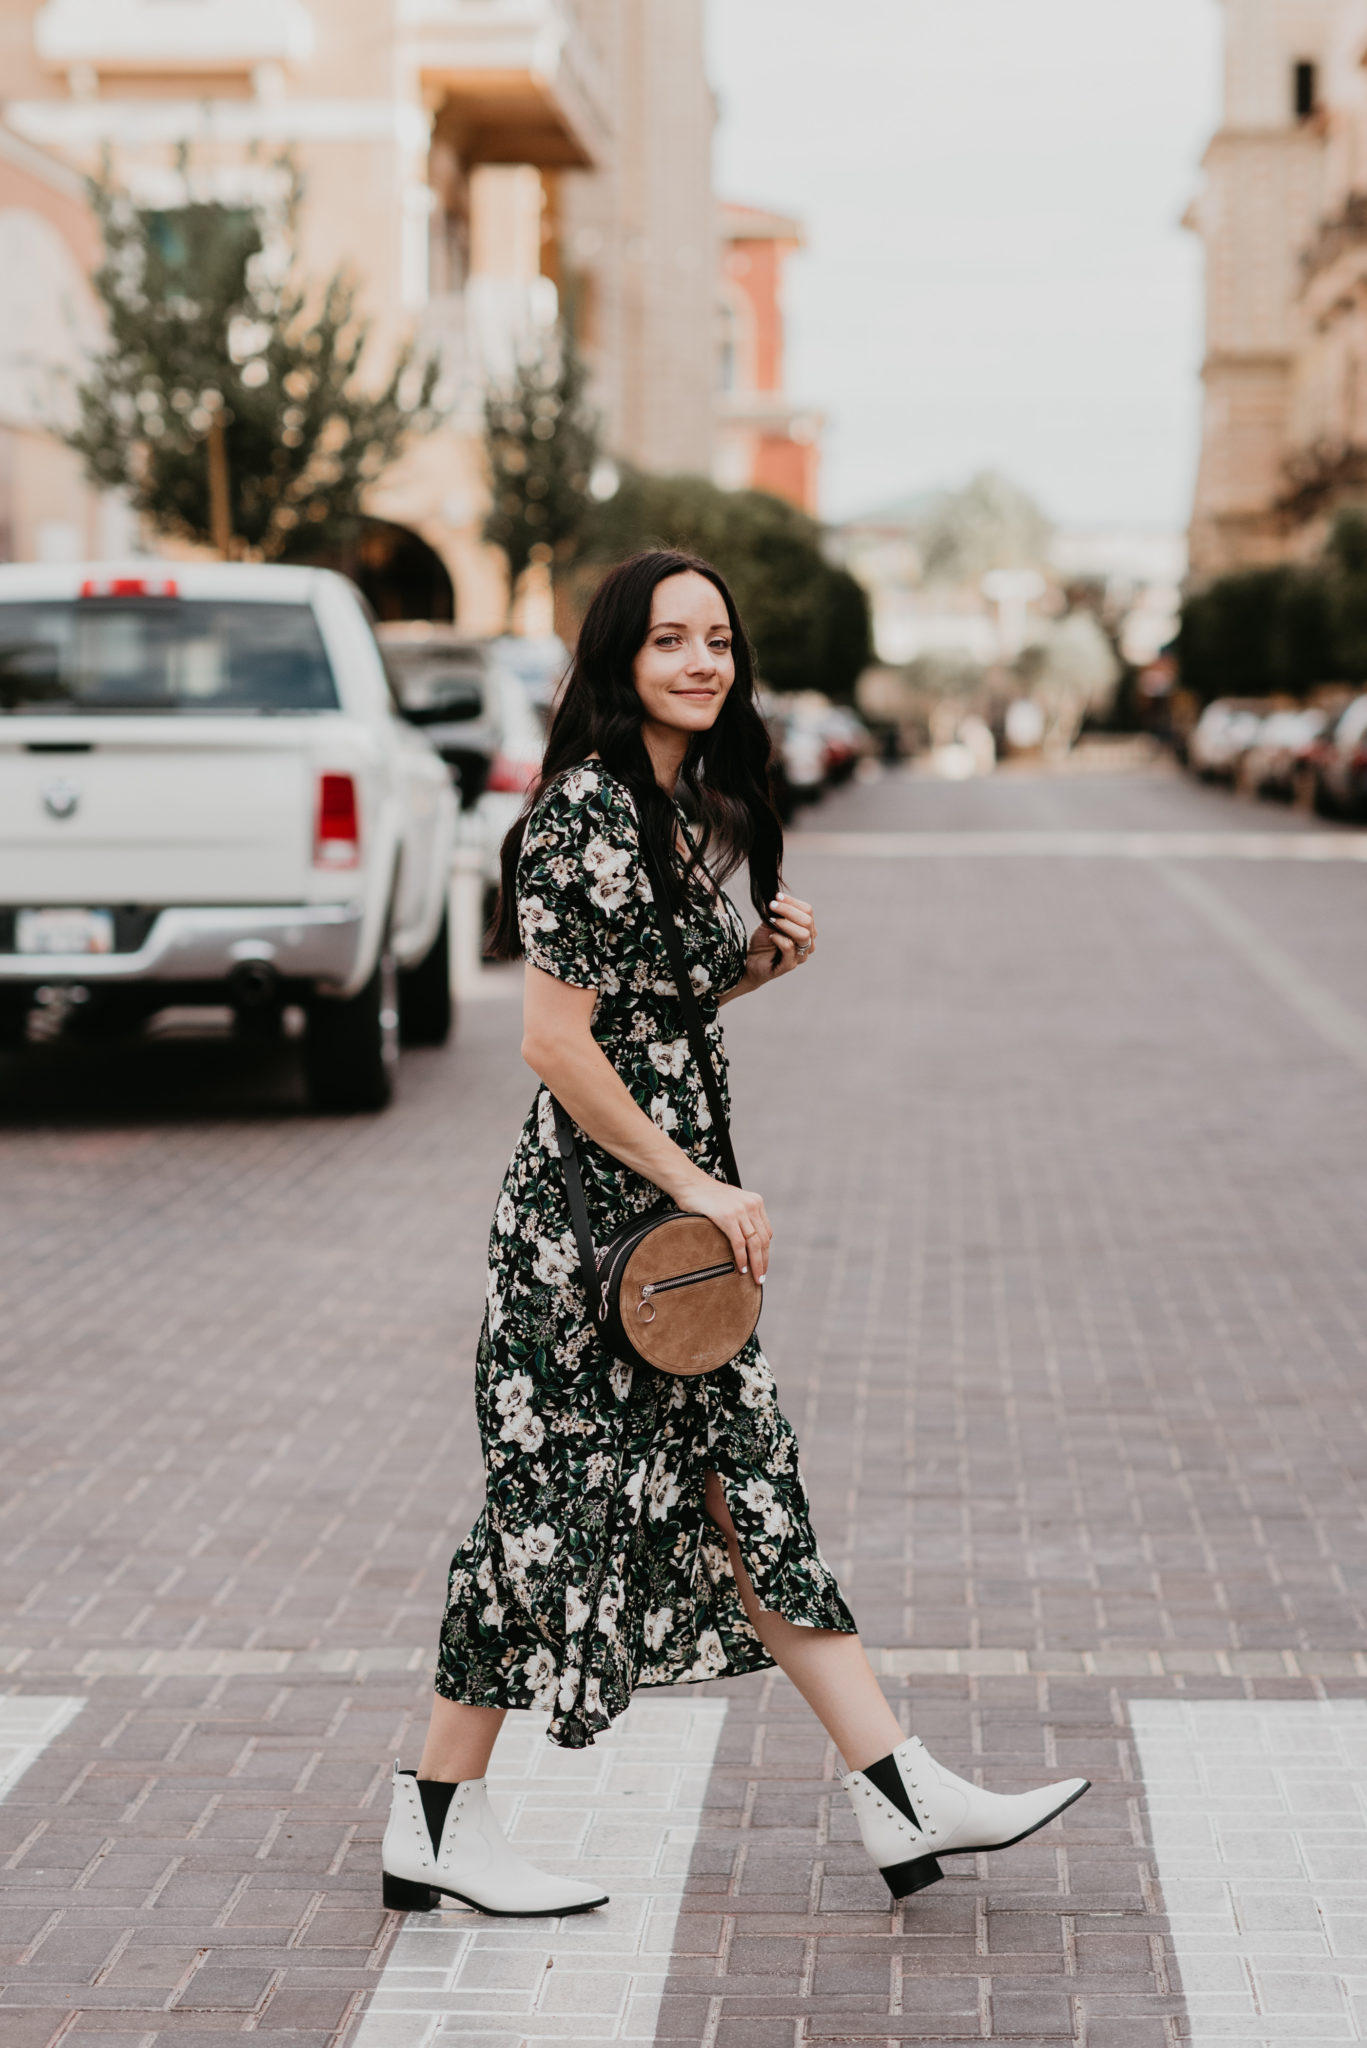 Nordstrom floral midi dress featured by popular Las Vegas fashion blogger, Outfits & Outings